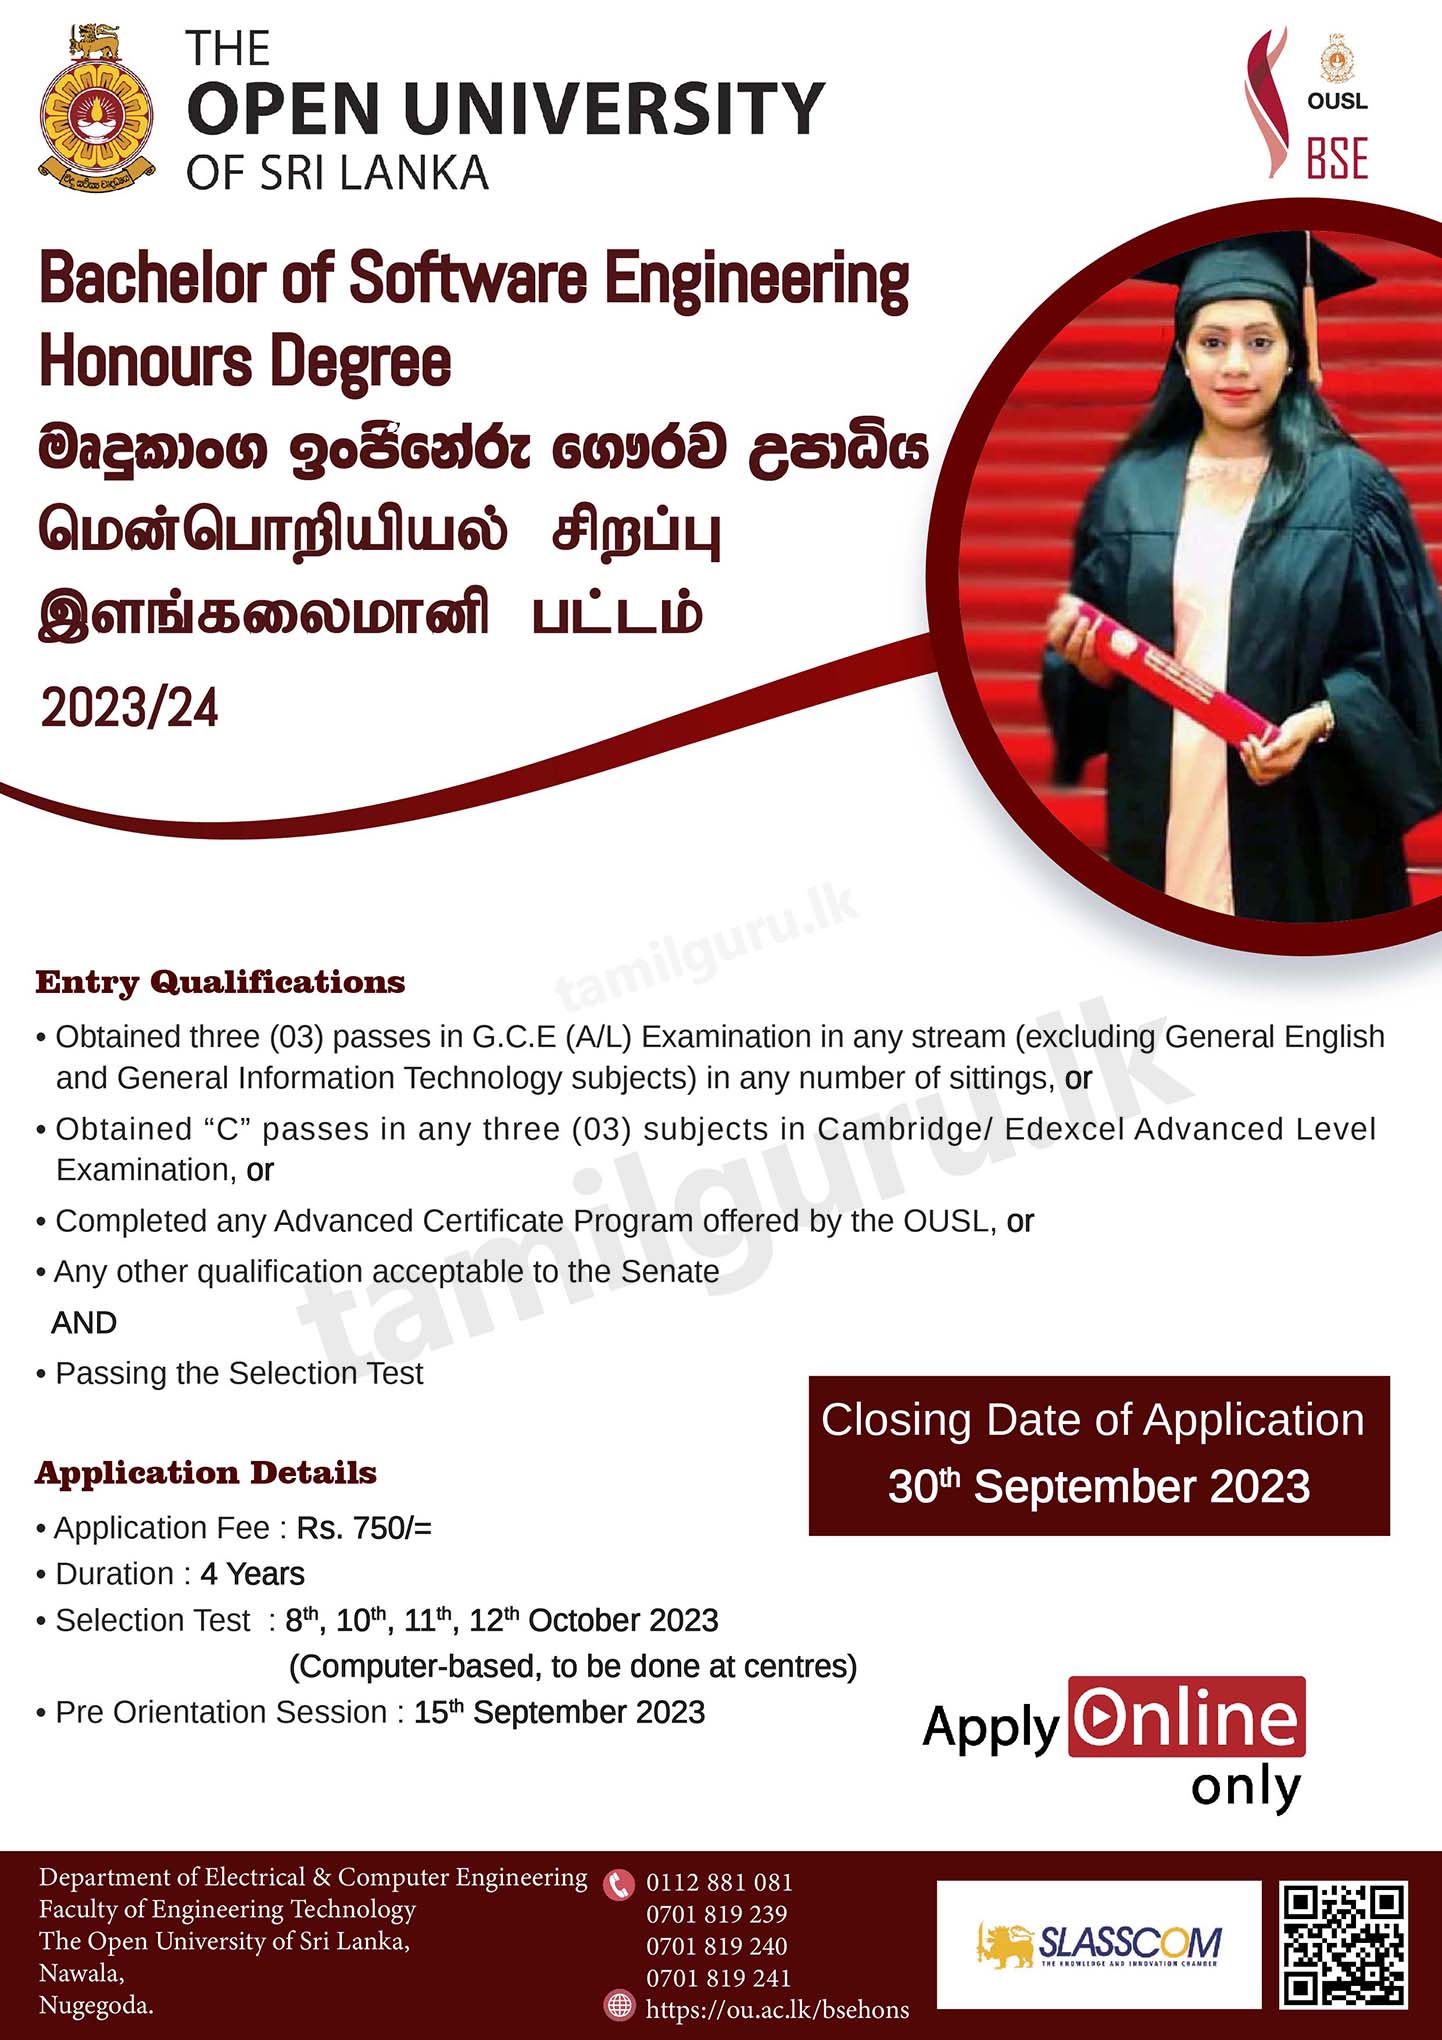 Bachelor of Software Engineering (BSE) Degree Programme 2023 - Open University (OUSL)